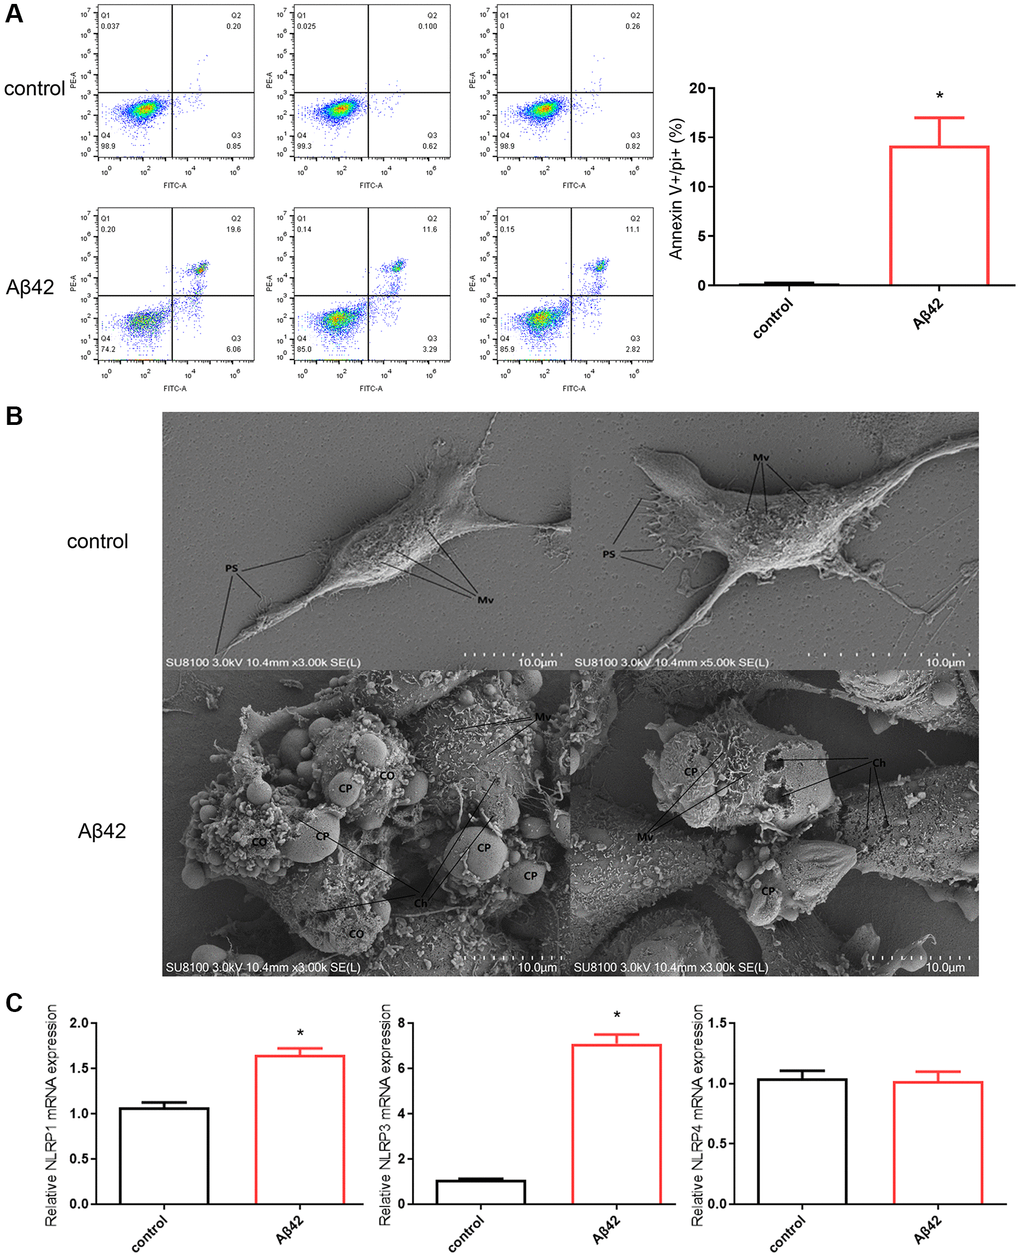 Aβ42 induces astrocyte pyroptosis. (A) Astrocytes were stimulated with the 1 μmol Aβ42 for 48 h were harvested for PI staining and flow cytometry analysis. (B) Scanning electron microscopy was performed to observe astrocyte pyroptosis in the control and Aβ42 groups. (C) Real-time quantitative PCR was used to detect the expression of astrocyte pyroptosis-associated inflammasomes (NLRP1, NLRP3, NLRP4) in the control and Aβ42 groups. *p 